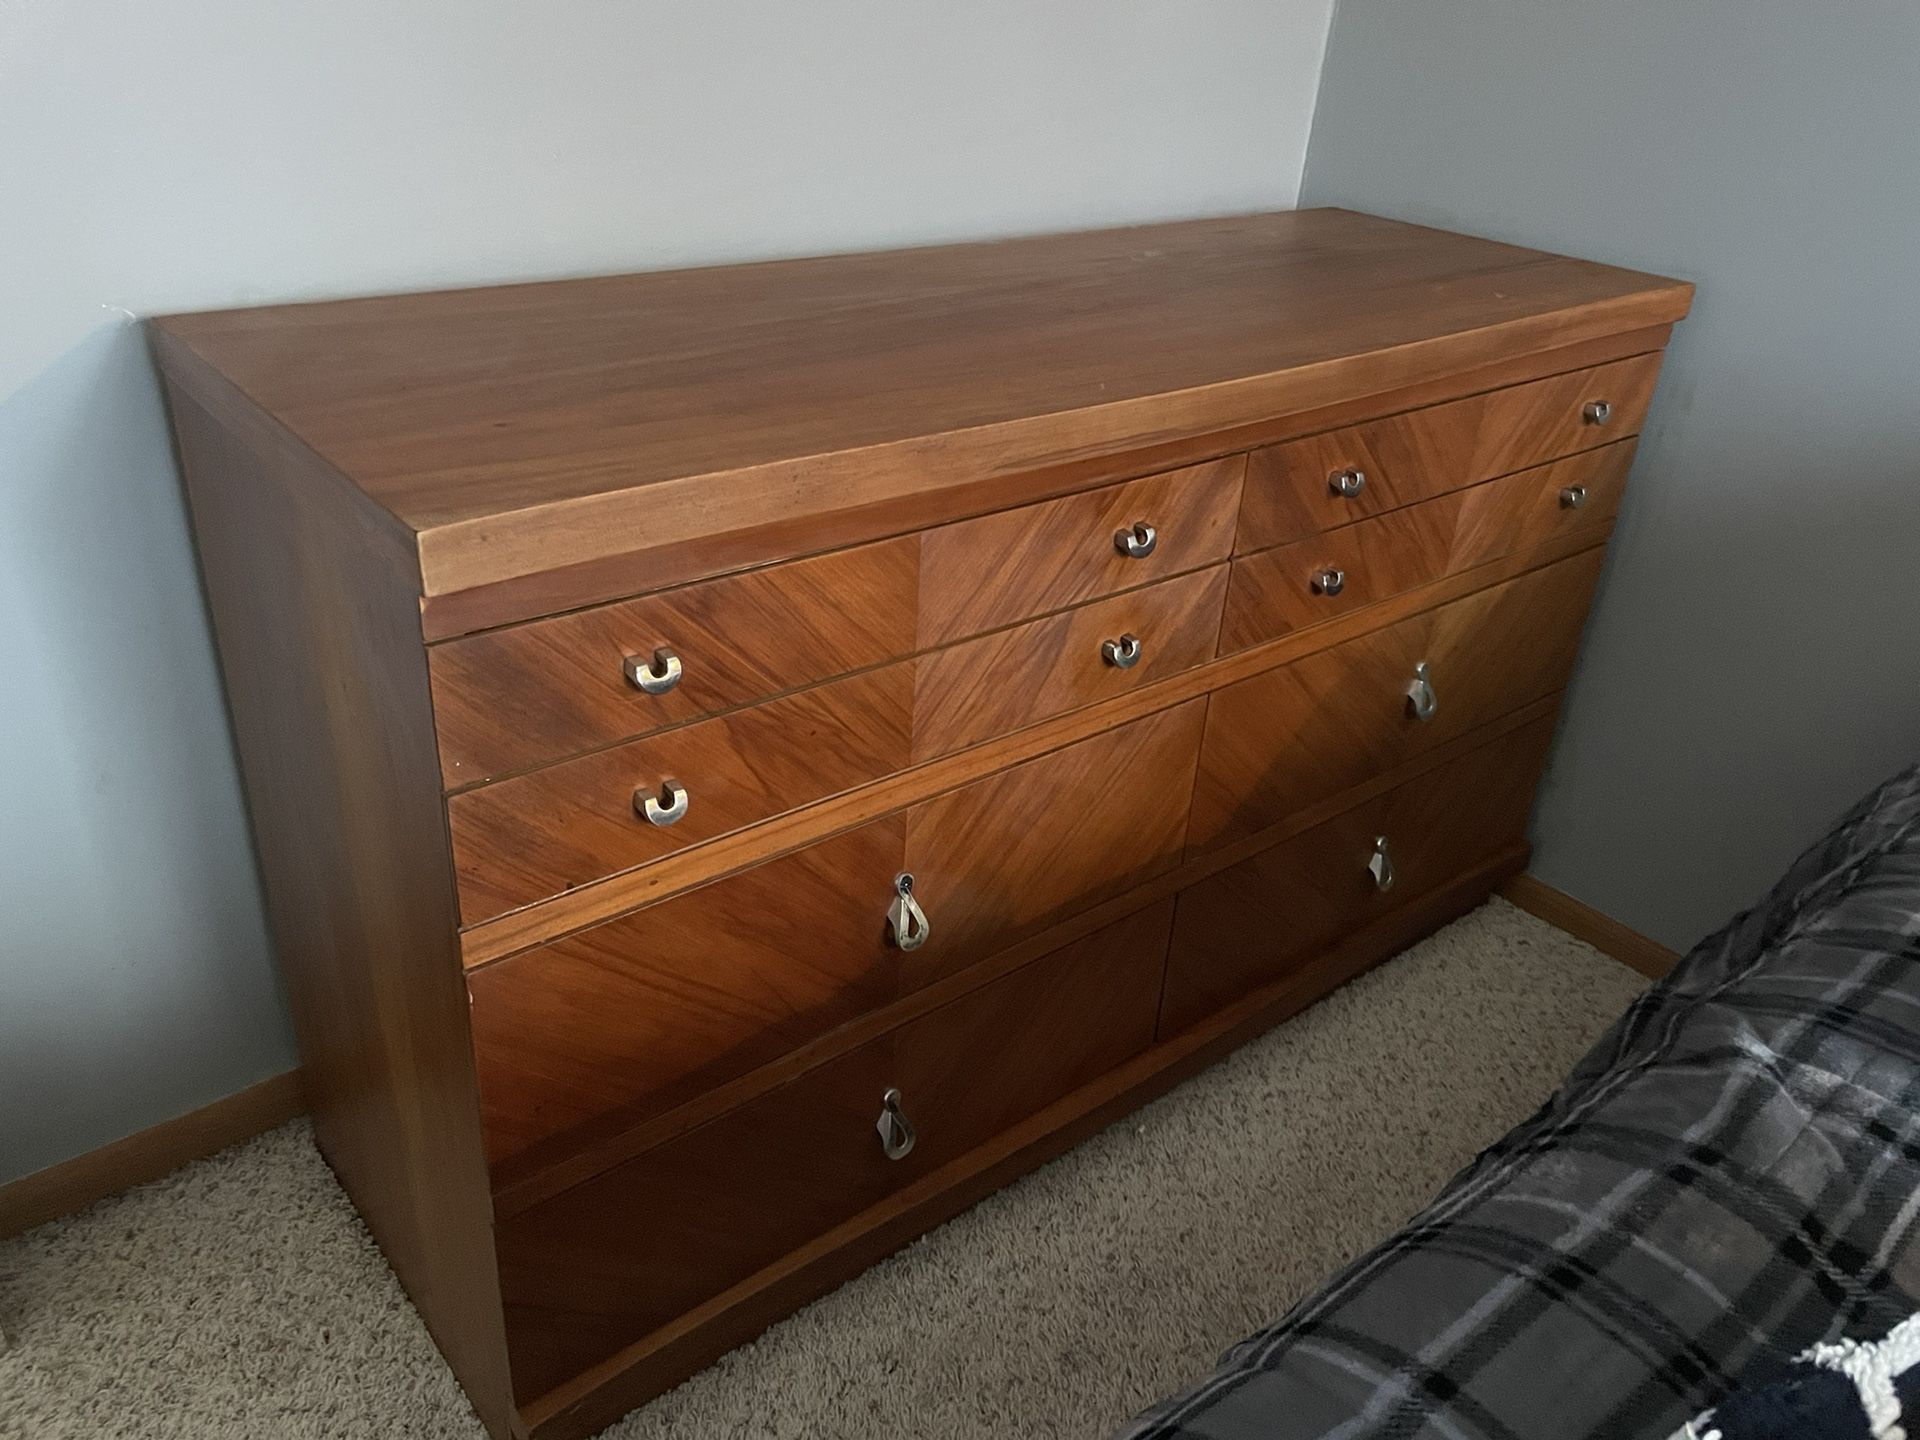 Cherry Wood Dresser with 8 Drawers-Elegant Storage Solution, 54x19x32 inches